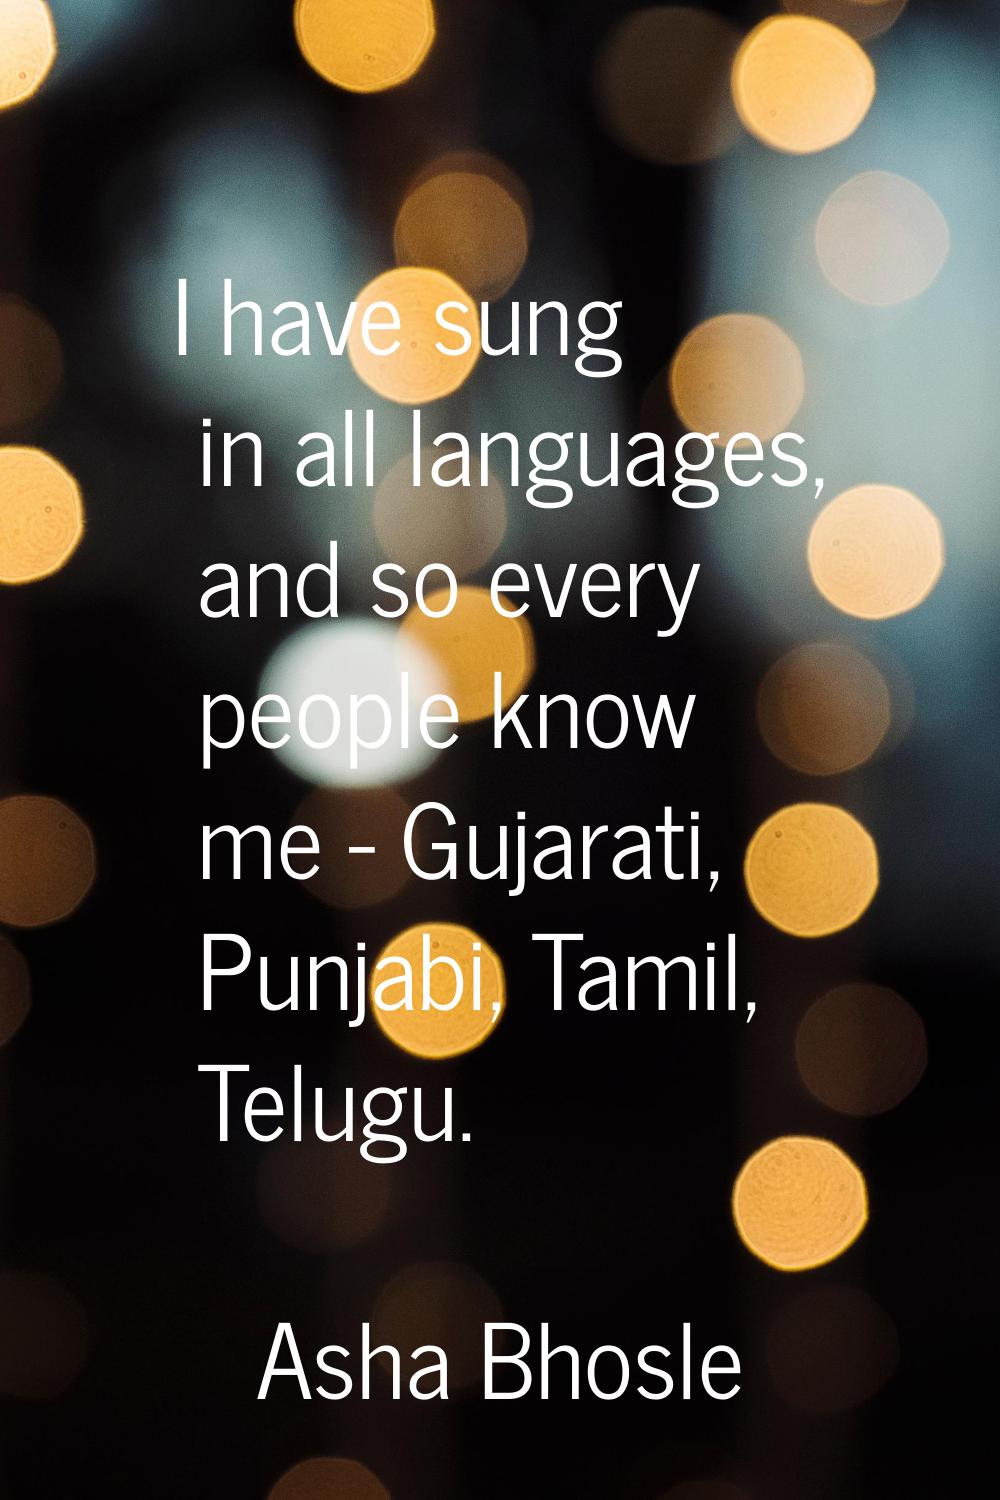 I have sung in all languages, and so every people know me - Gujarati, Punjabi, Tamil, Telugu.